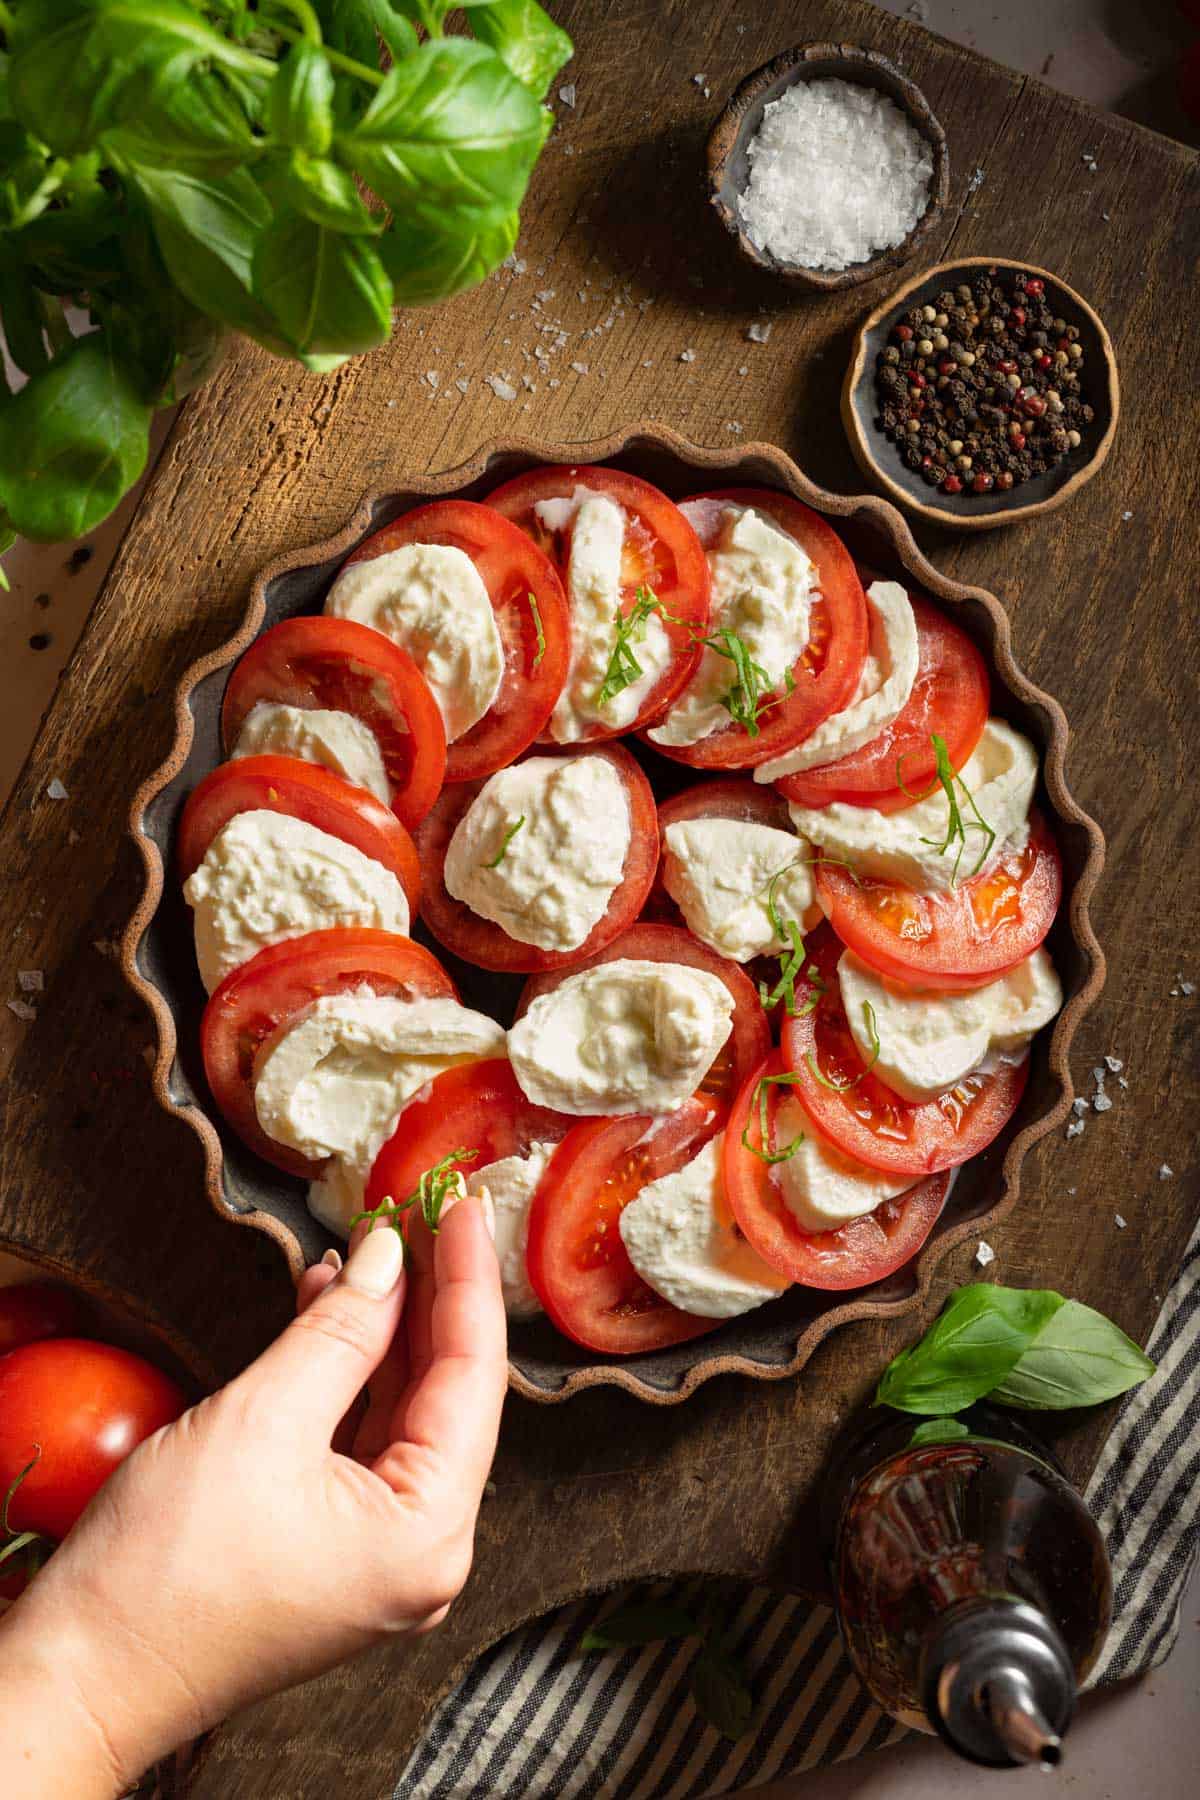 A hand adding fresh basil to a plate of burrata and tomatoes.